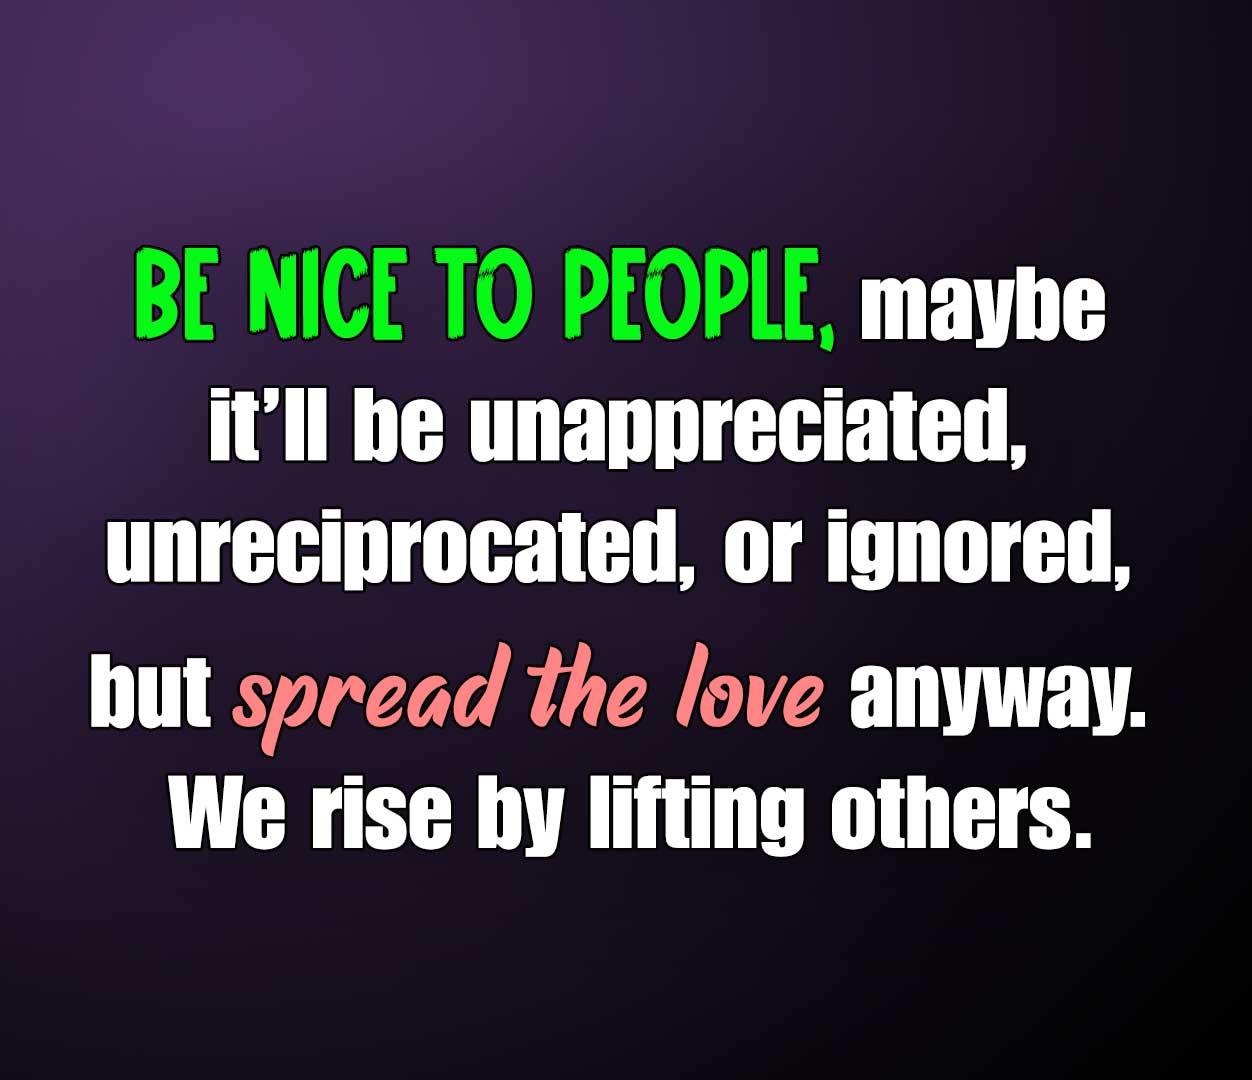 Be nice to people… maybe it’ll be unappreciated, unreciprocated, or ignored, but spread the love anyway. We rise by lifting others.